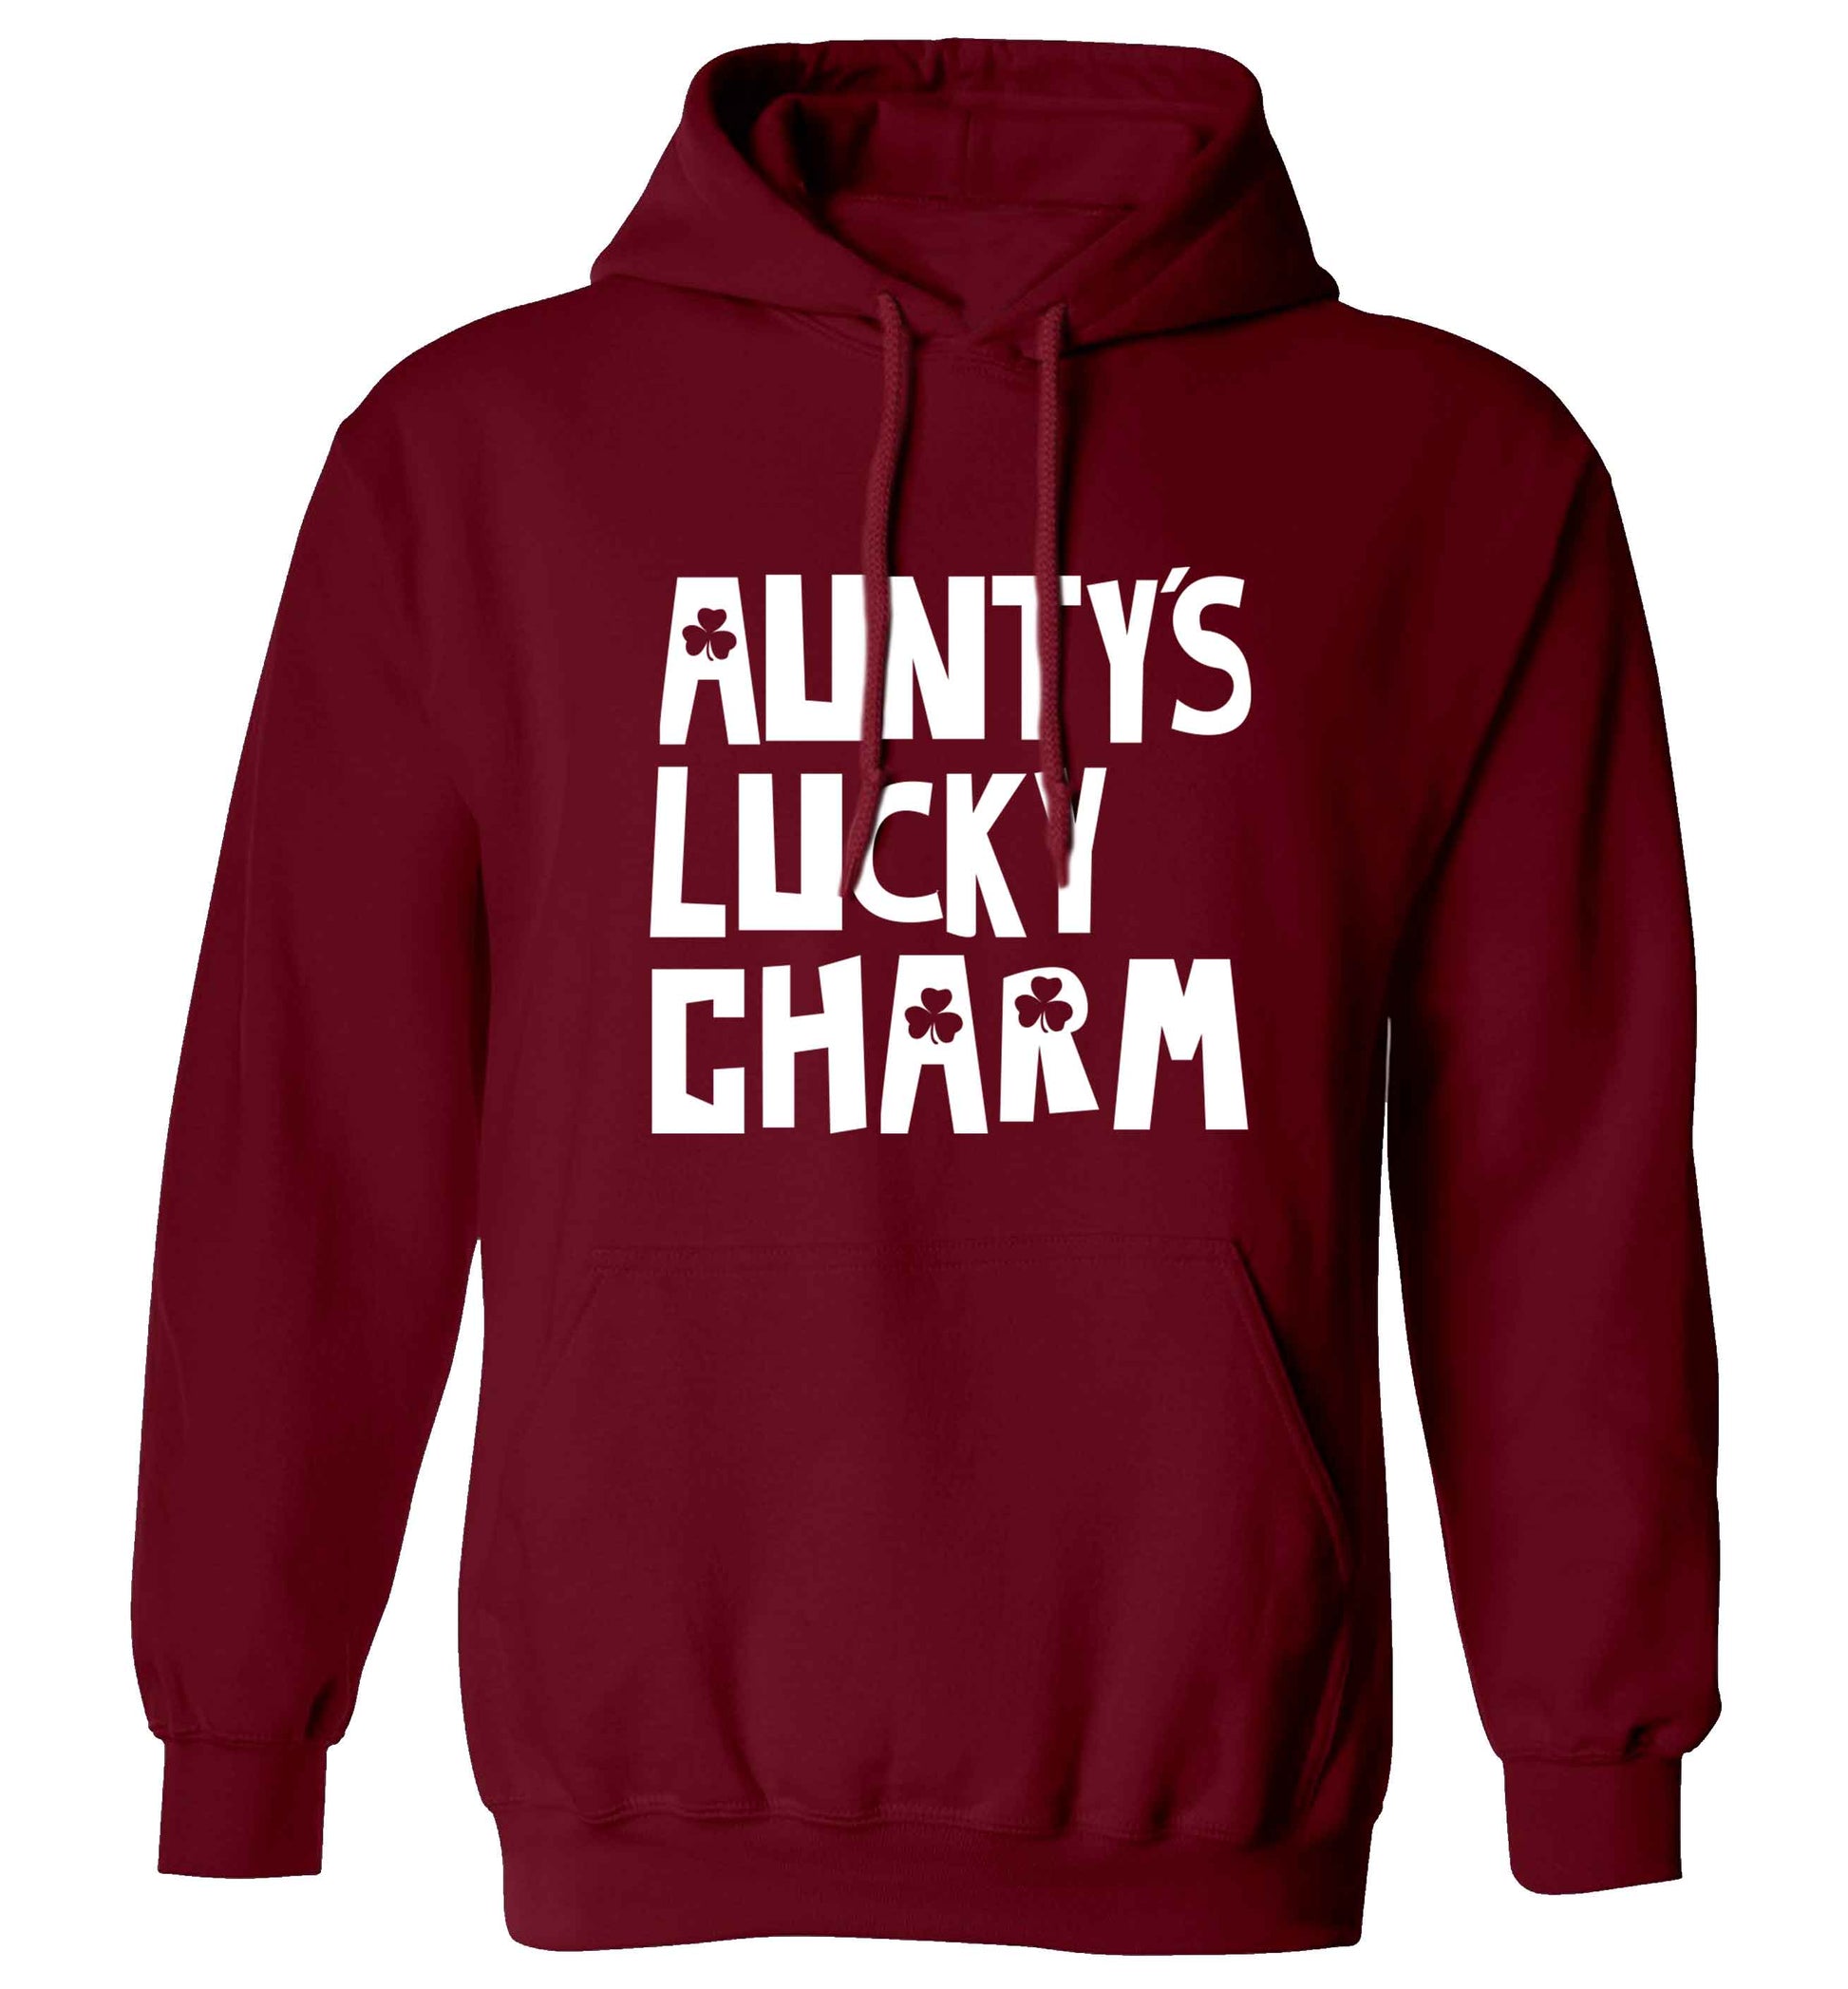 Aunty's lucky charm adults unisex maroon hoodie 2XL